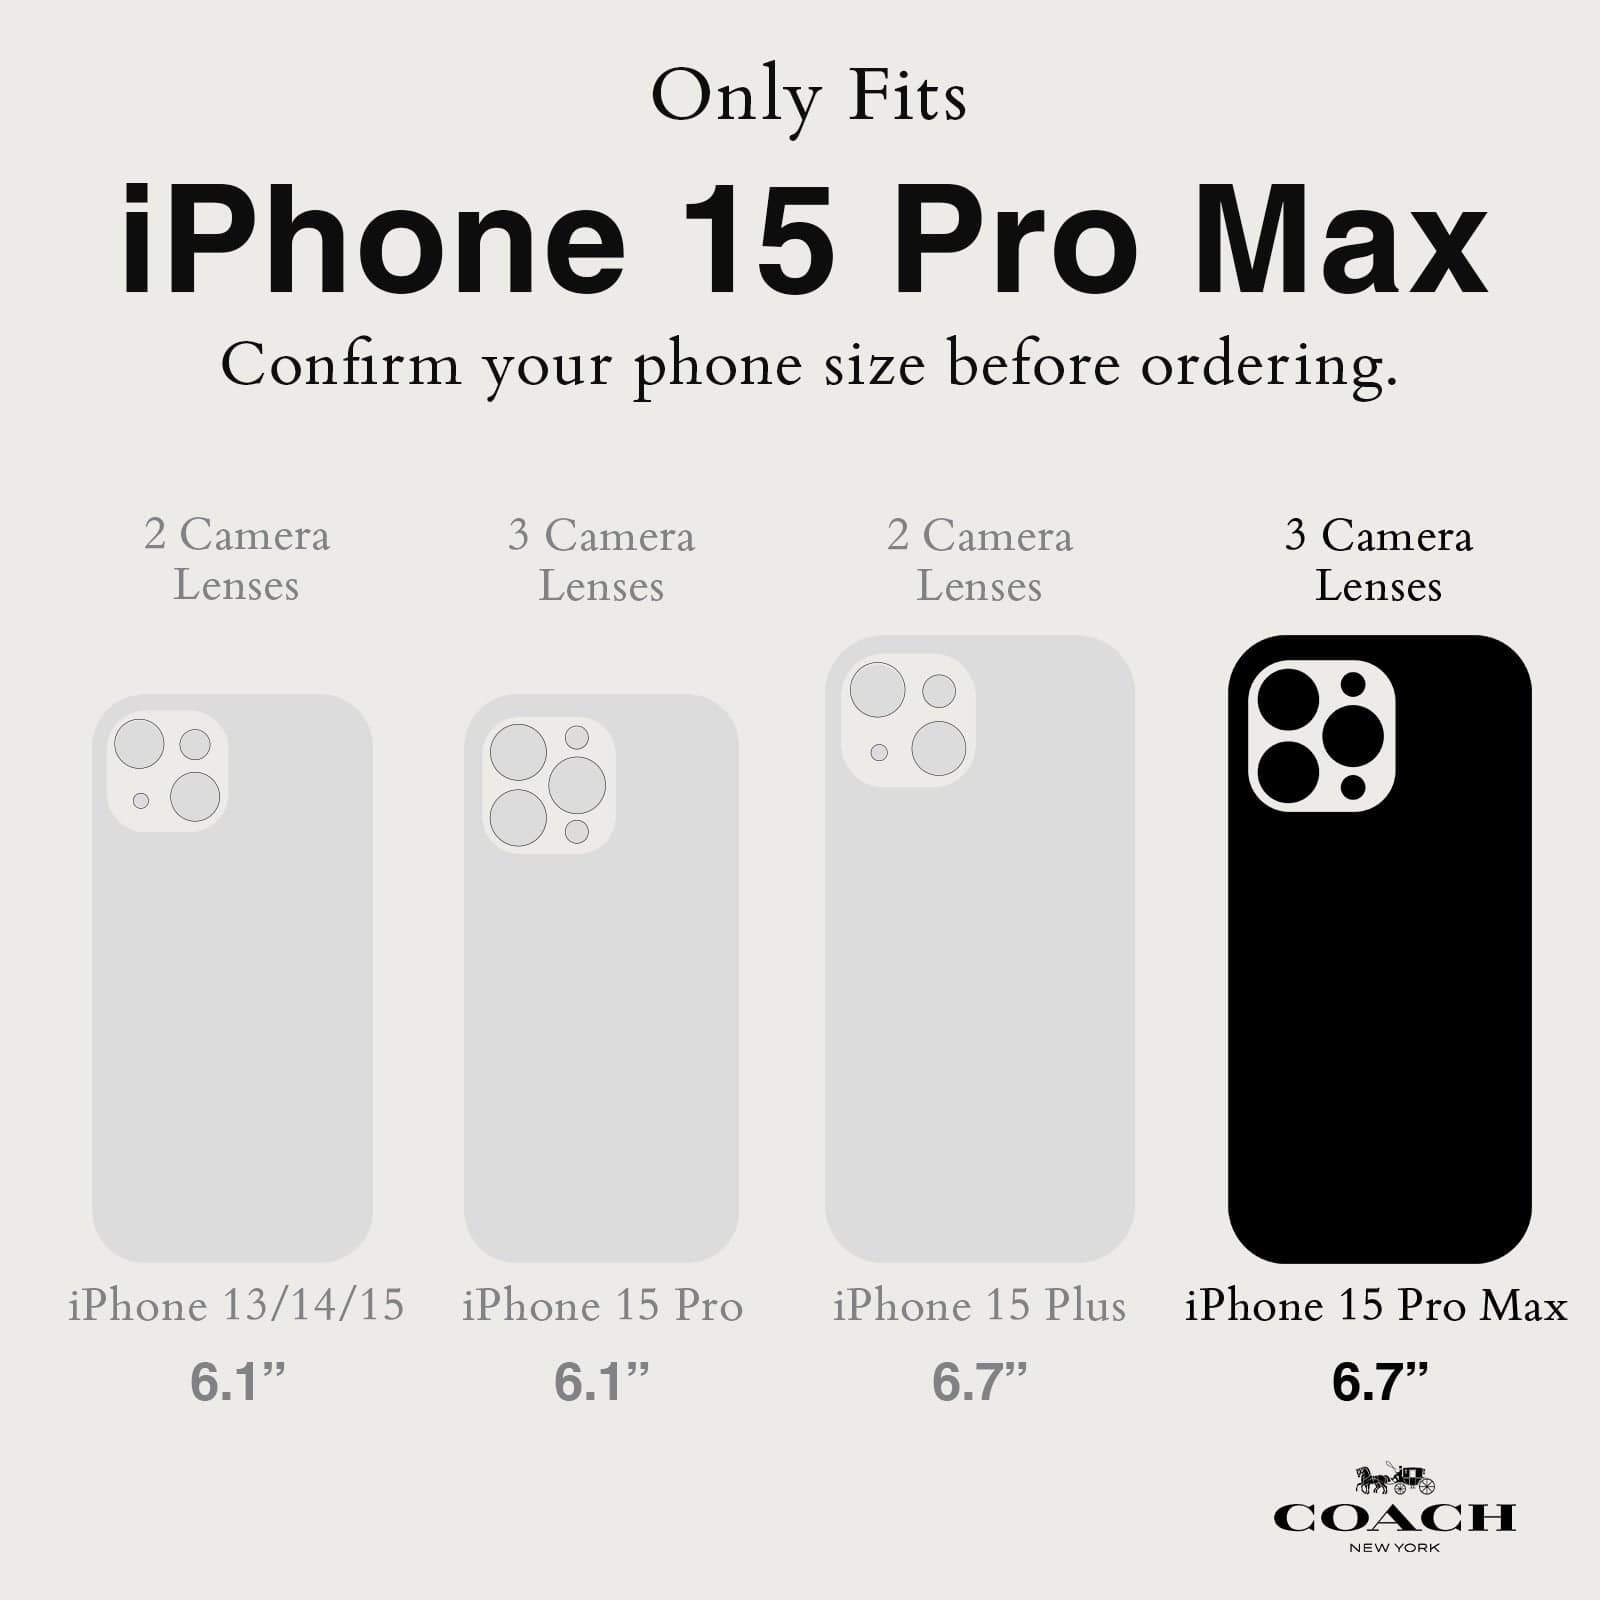 ONLY FITS IPHONE 15 PRO MAX.